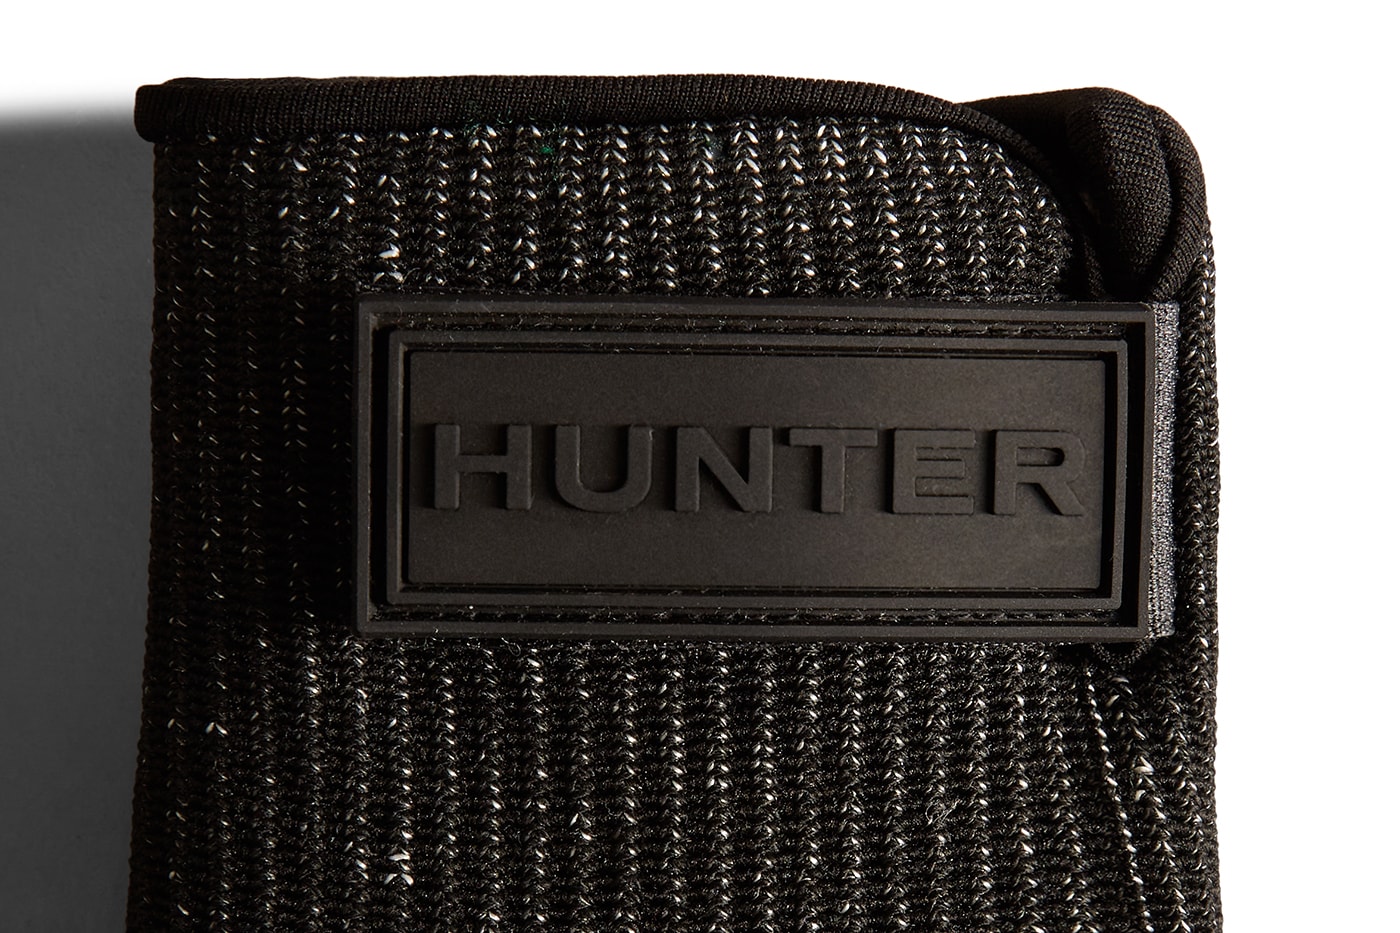 Extra Butter and Hunter Channels Small-town Mysteries in PLAY Boots Collab 